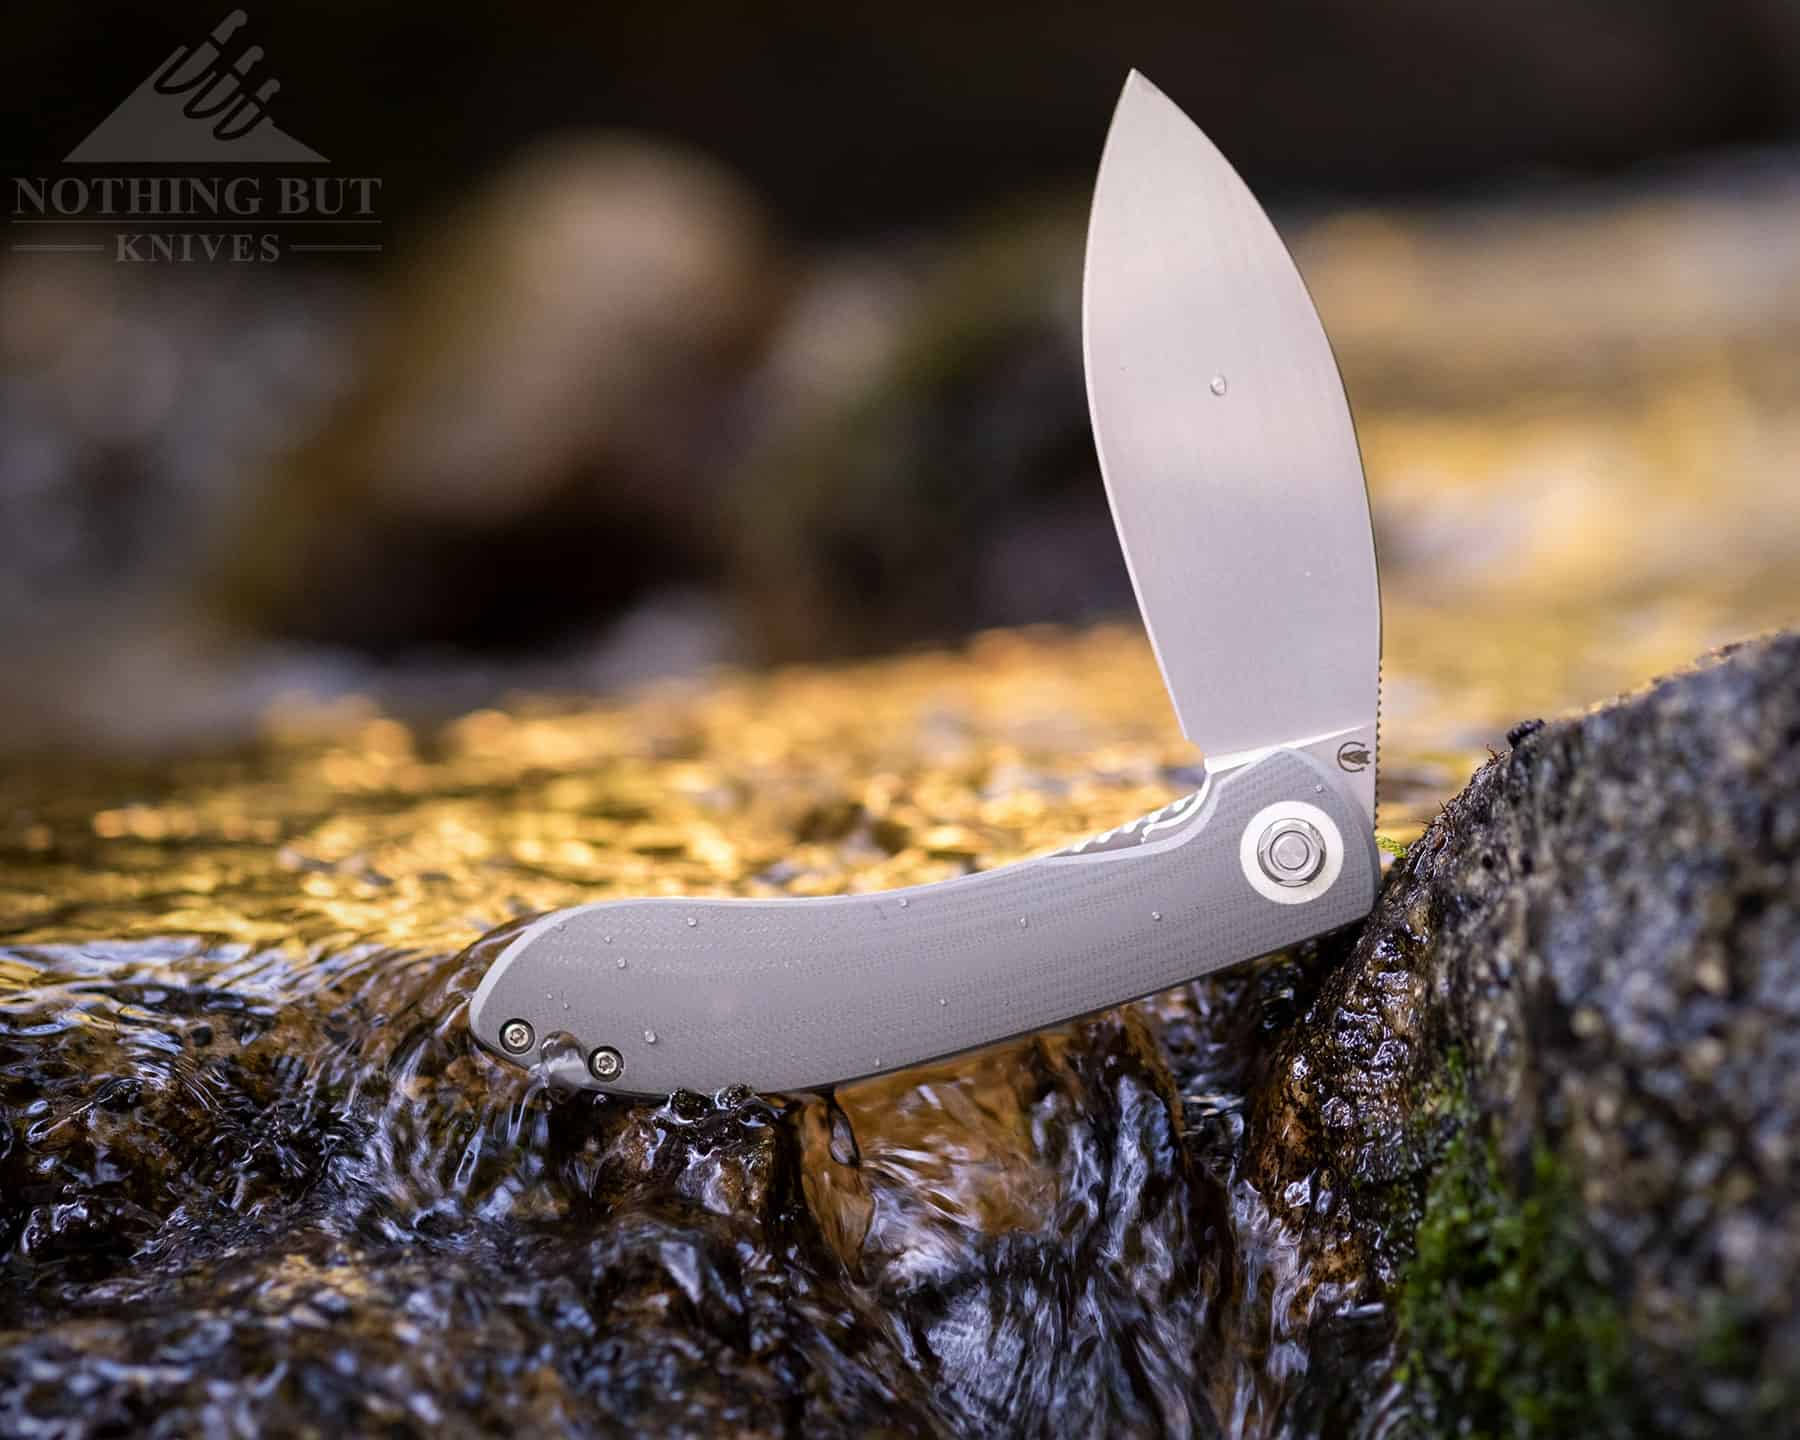 The Vosteed Nightshade Grey has a 154CM steel blade, caged ball bearings and G-10 handle scales.